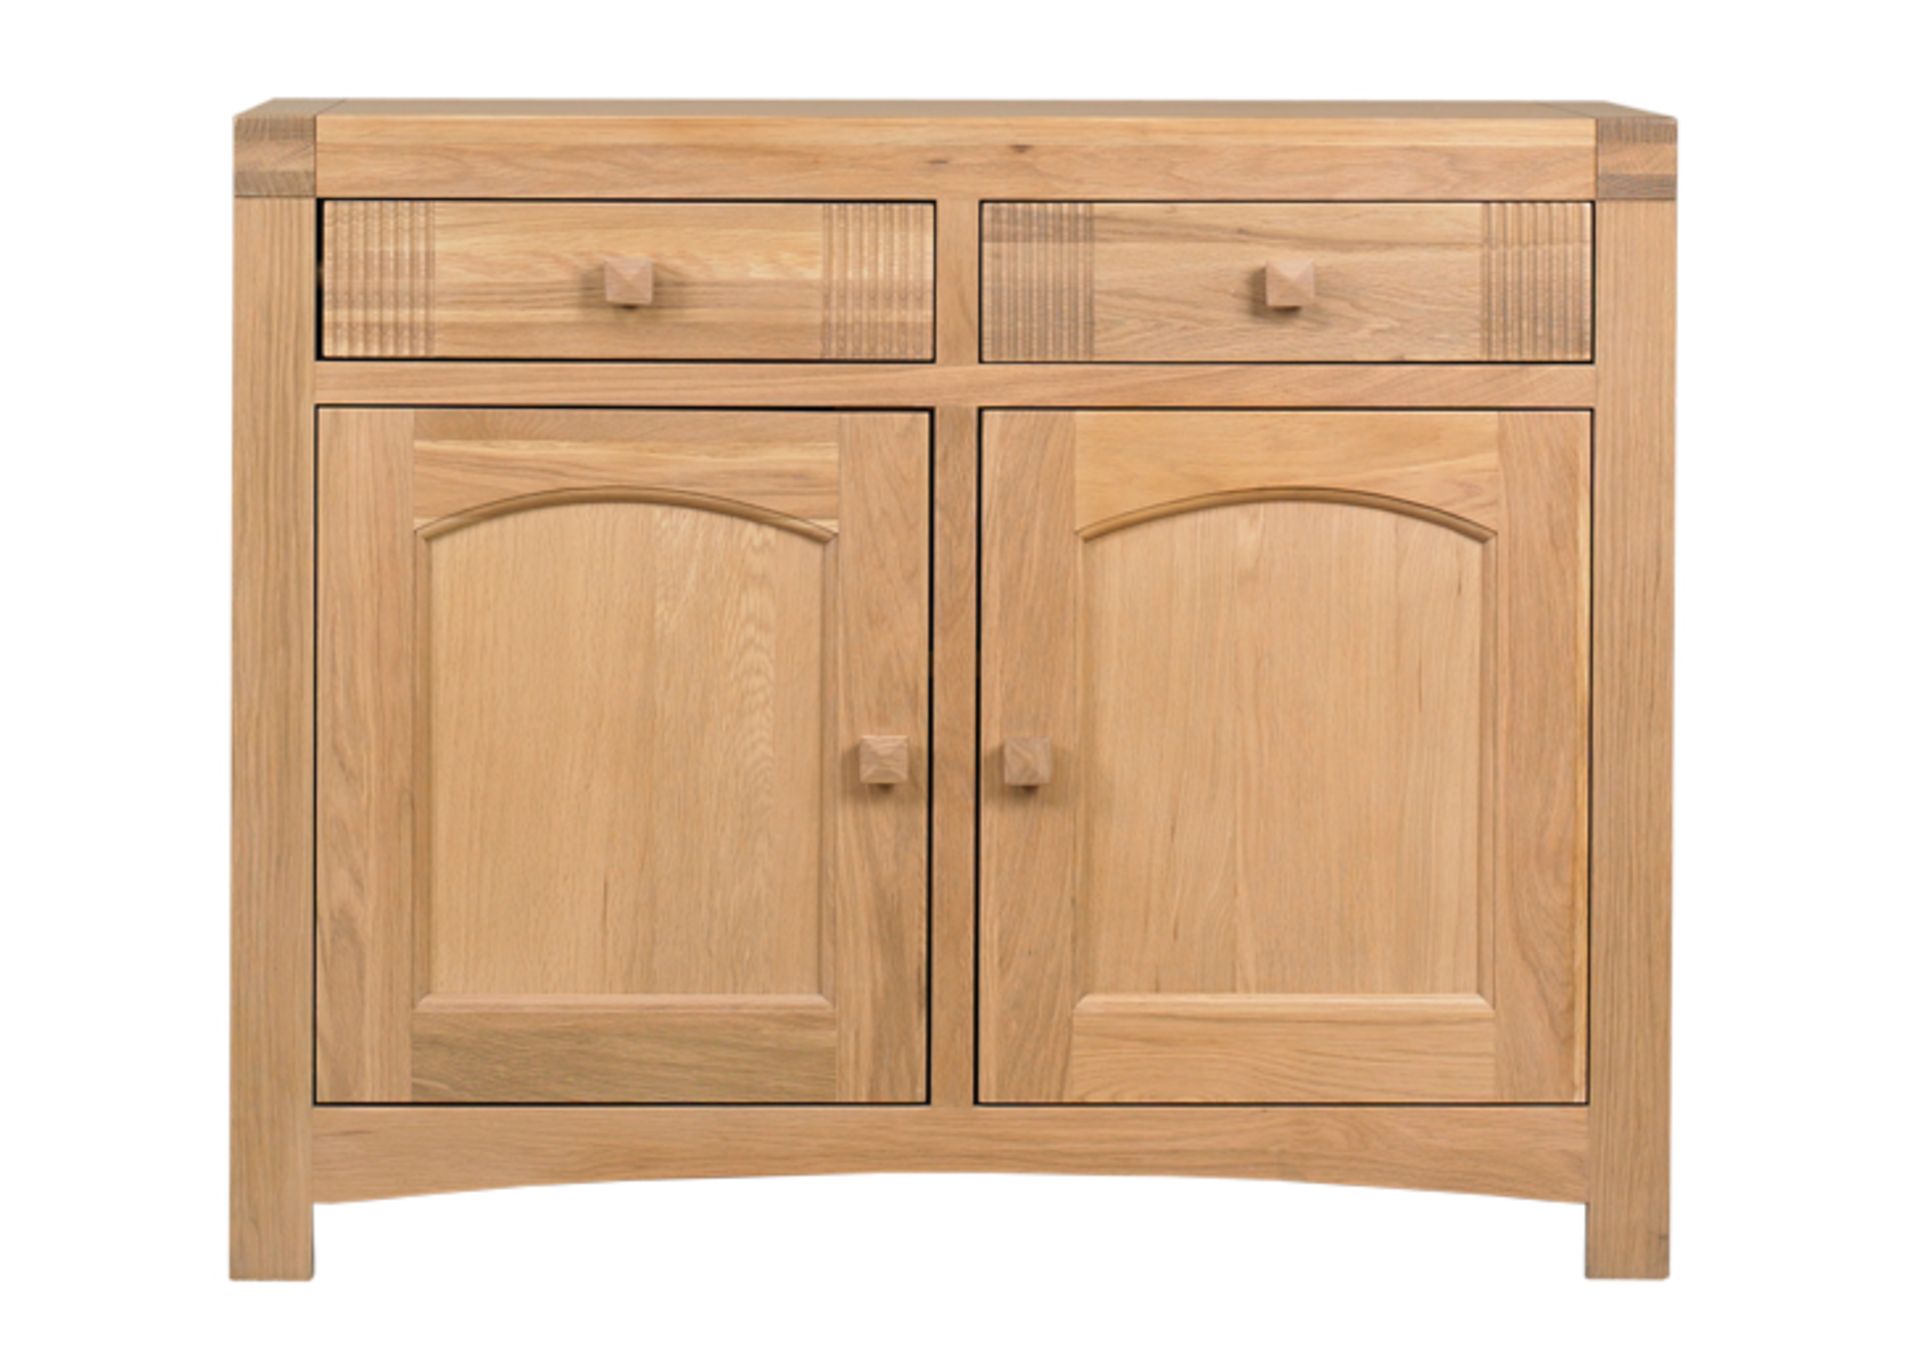 1 x Mark Webster Buckingham Small Sideboad  - Two Door/Two Drawer - White Wash Oak With a Timeless - Image 3 of 5